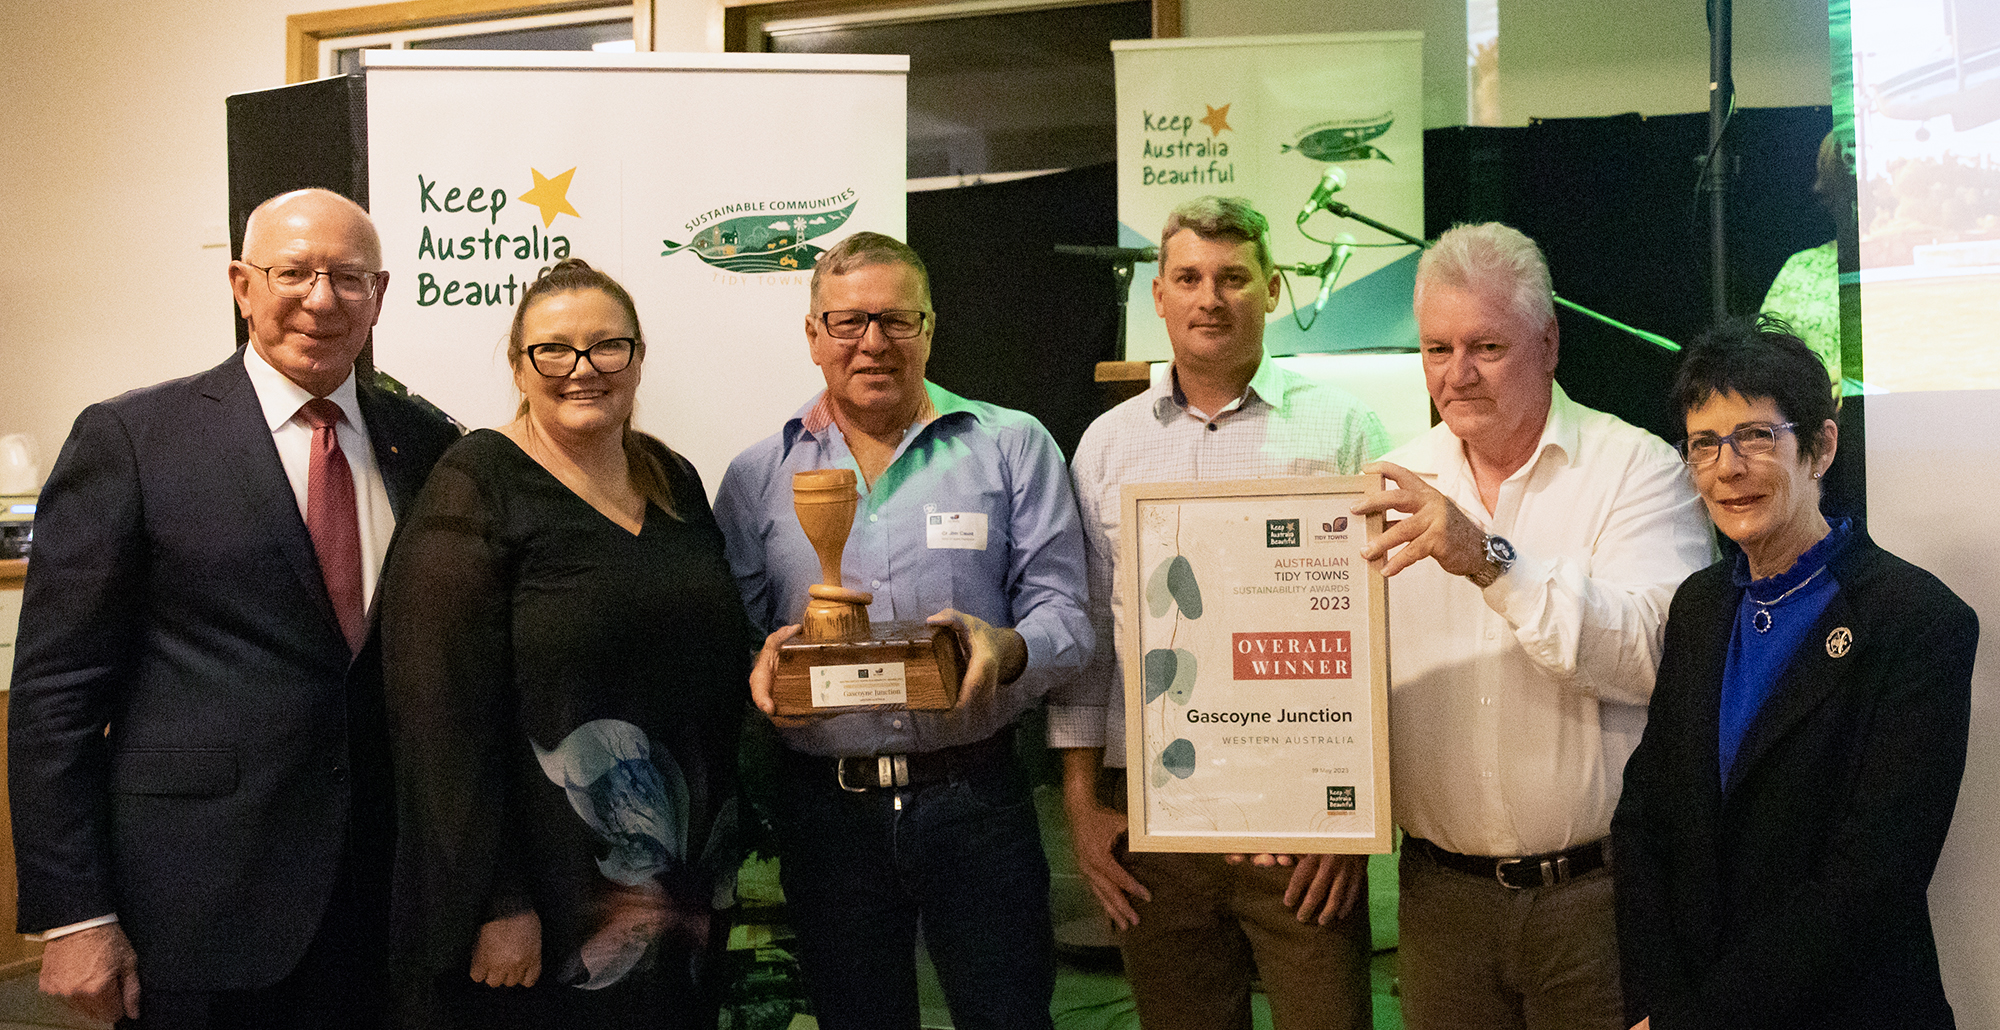 Overall 2023 Tidy Towns Sustainability Awards Winner